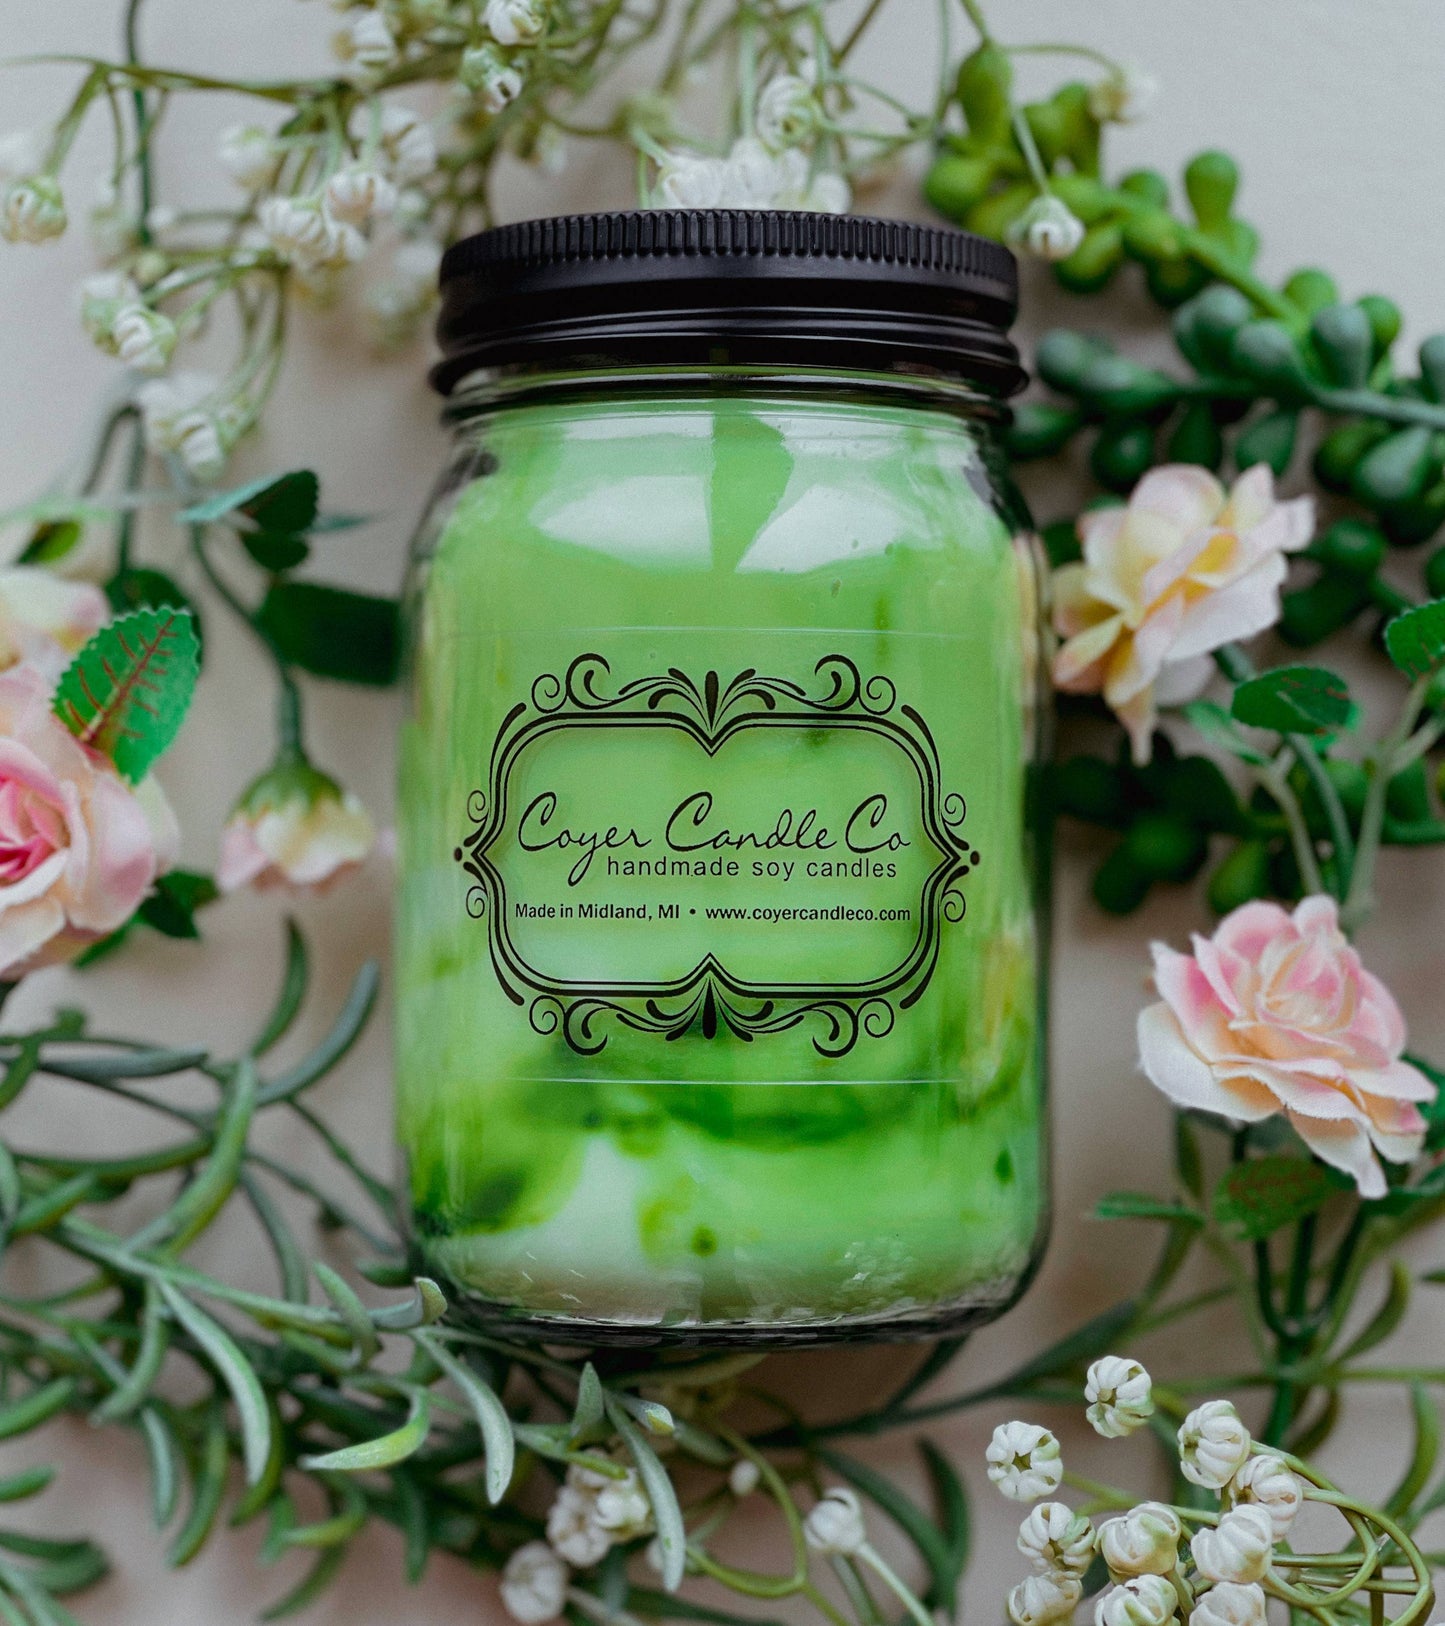 Coyer Candle Co. - 16 oz. Pint Mason Jar Candles - Spring Collection: Pecans n' Maple Syrup Waffles